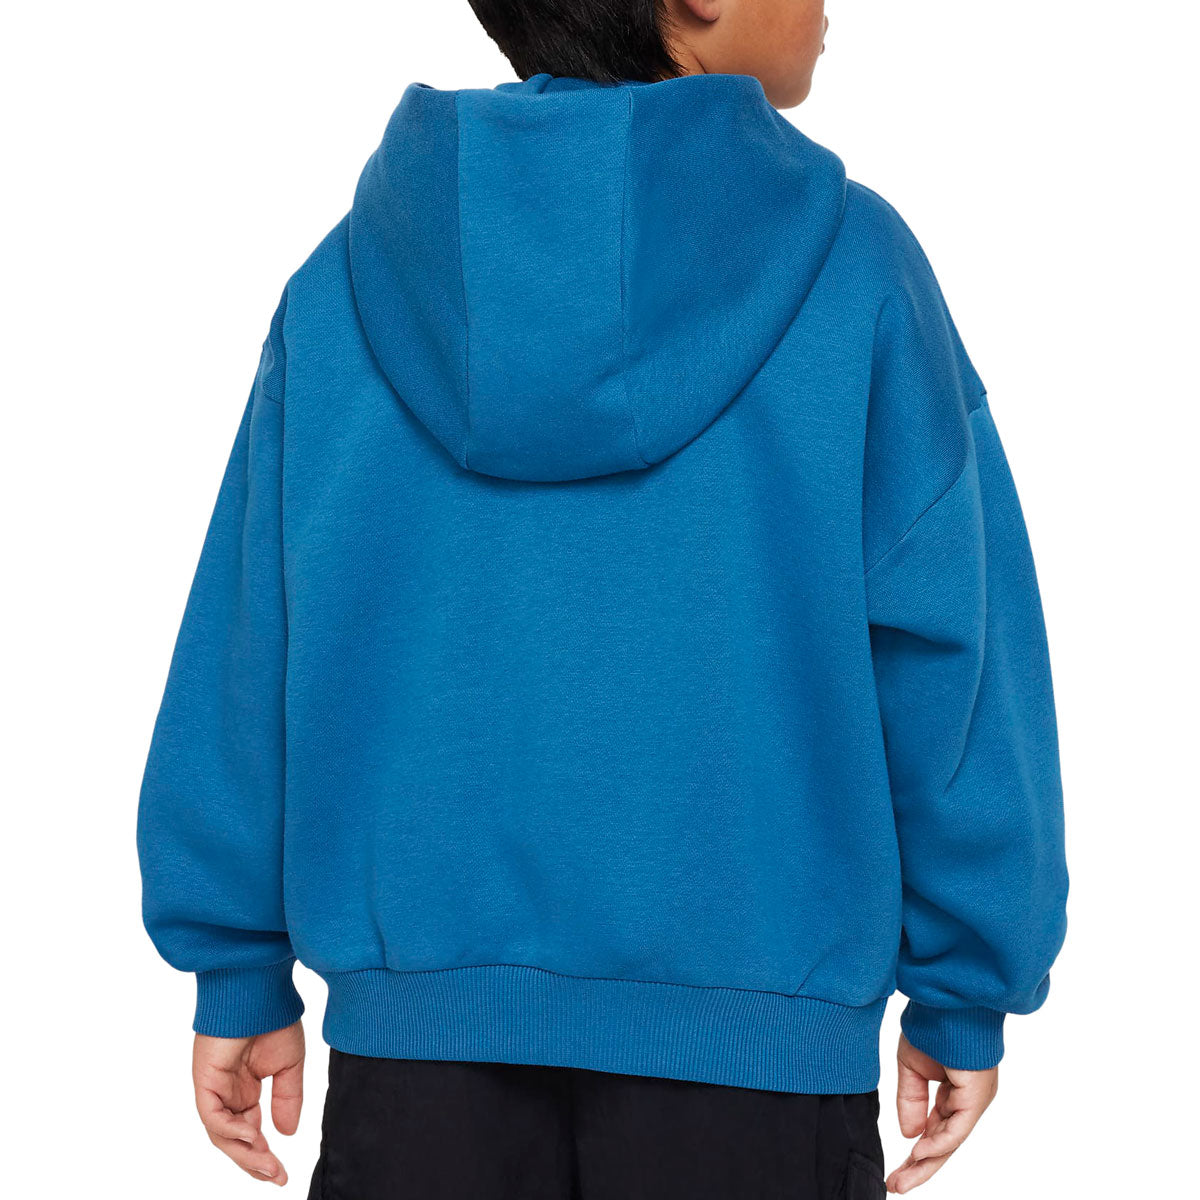 Nike SB Youth Icon Hoodie - Industrial Blue/White image 2